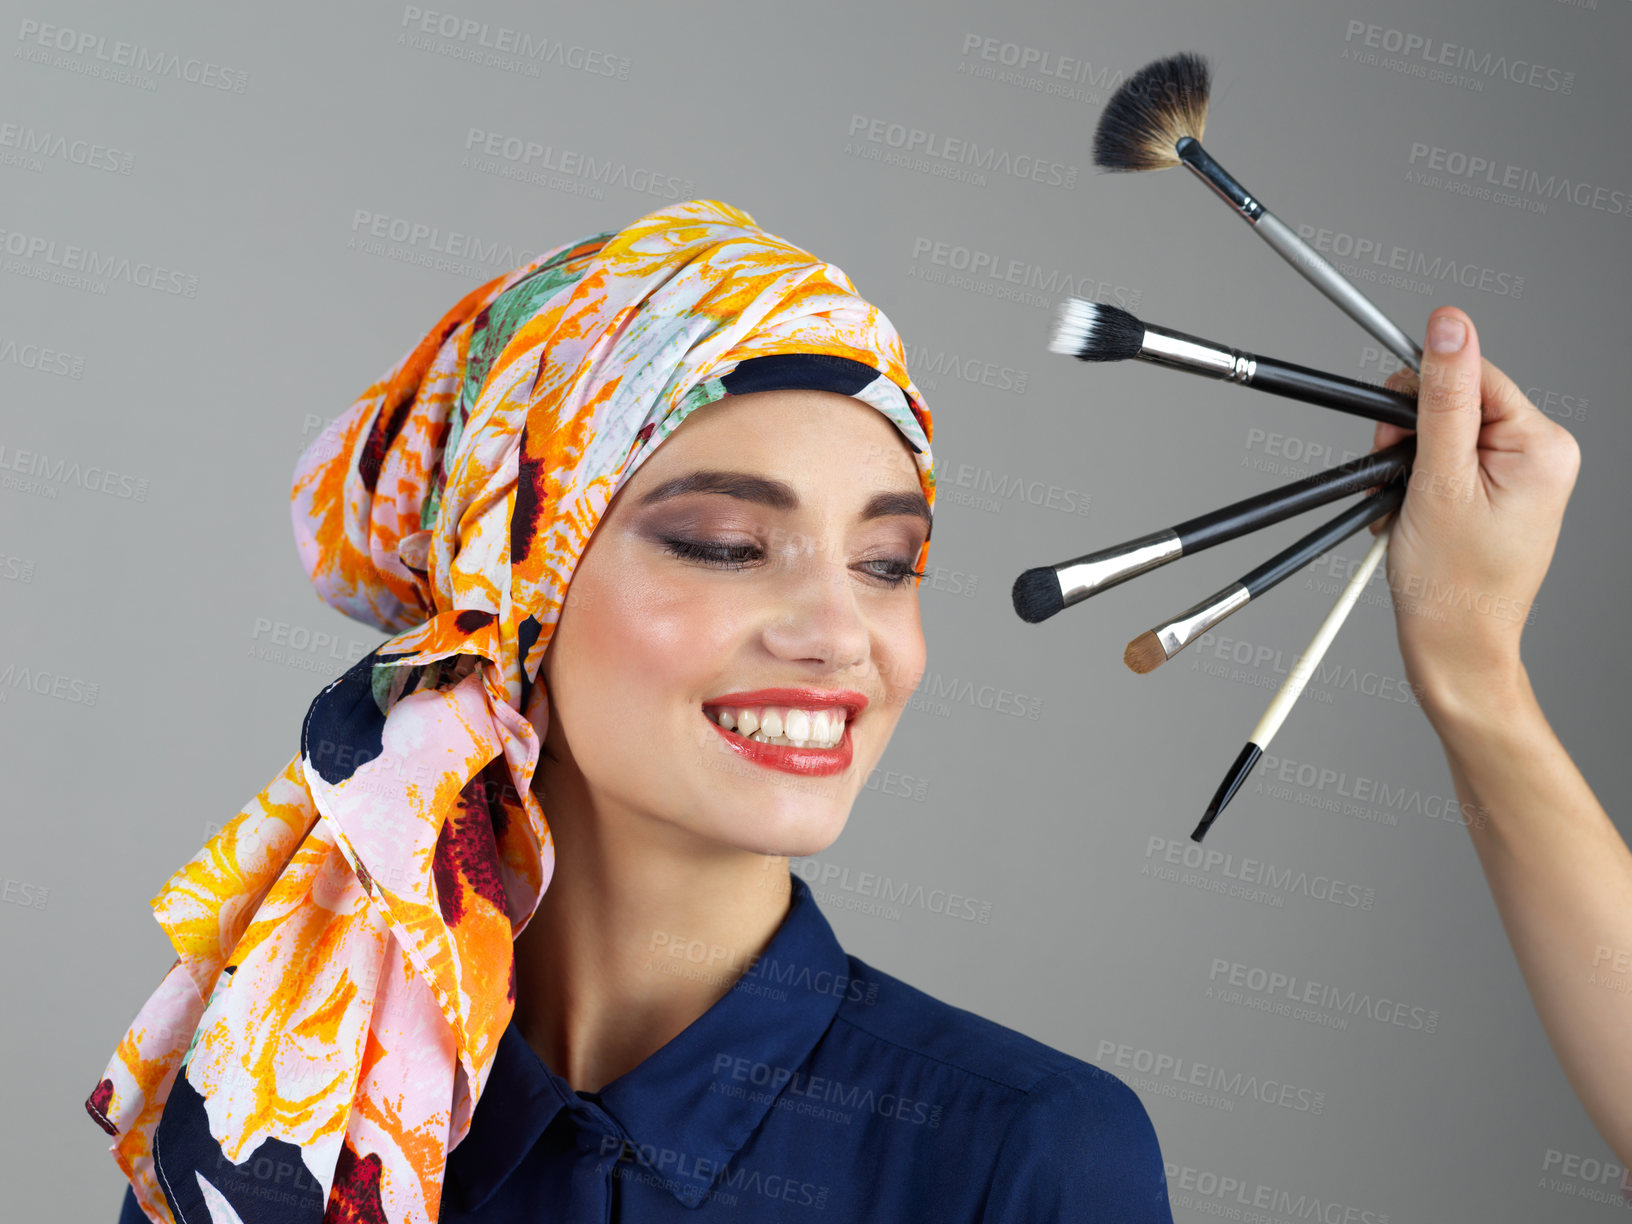 Buy stock photo Studio shot of a confident young woman wearing a colorful head scarf while looking at different makeup brushes being held in front of her